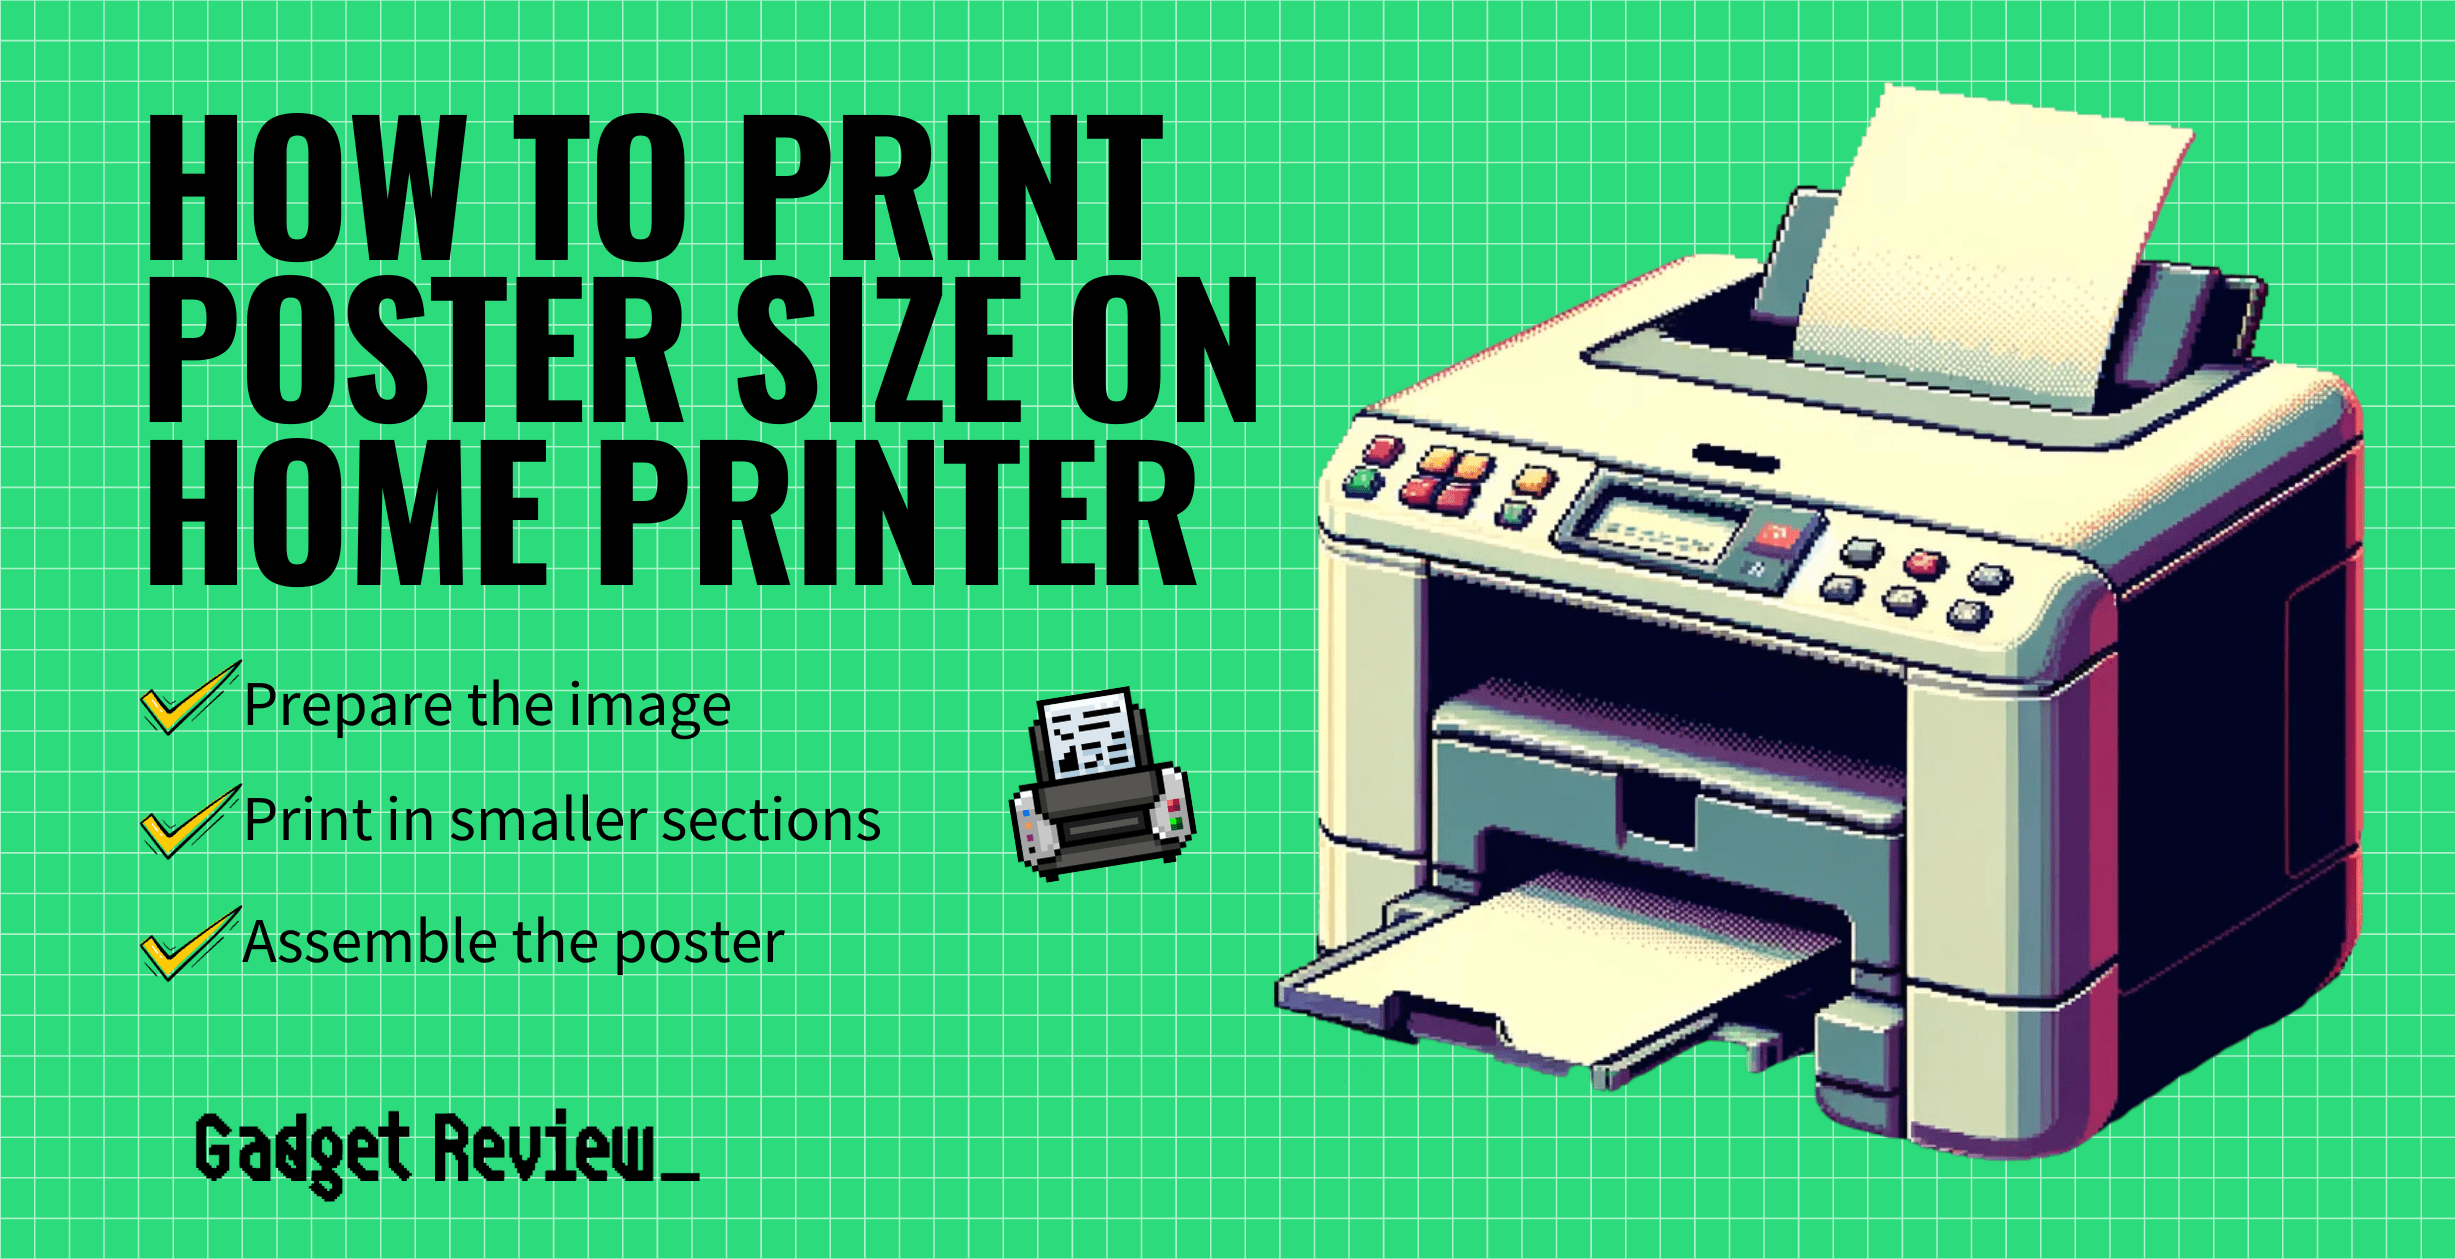 How to Print Poster Size on a Home Printer